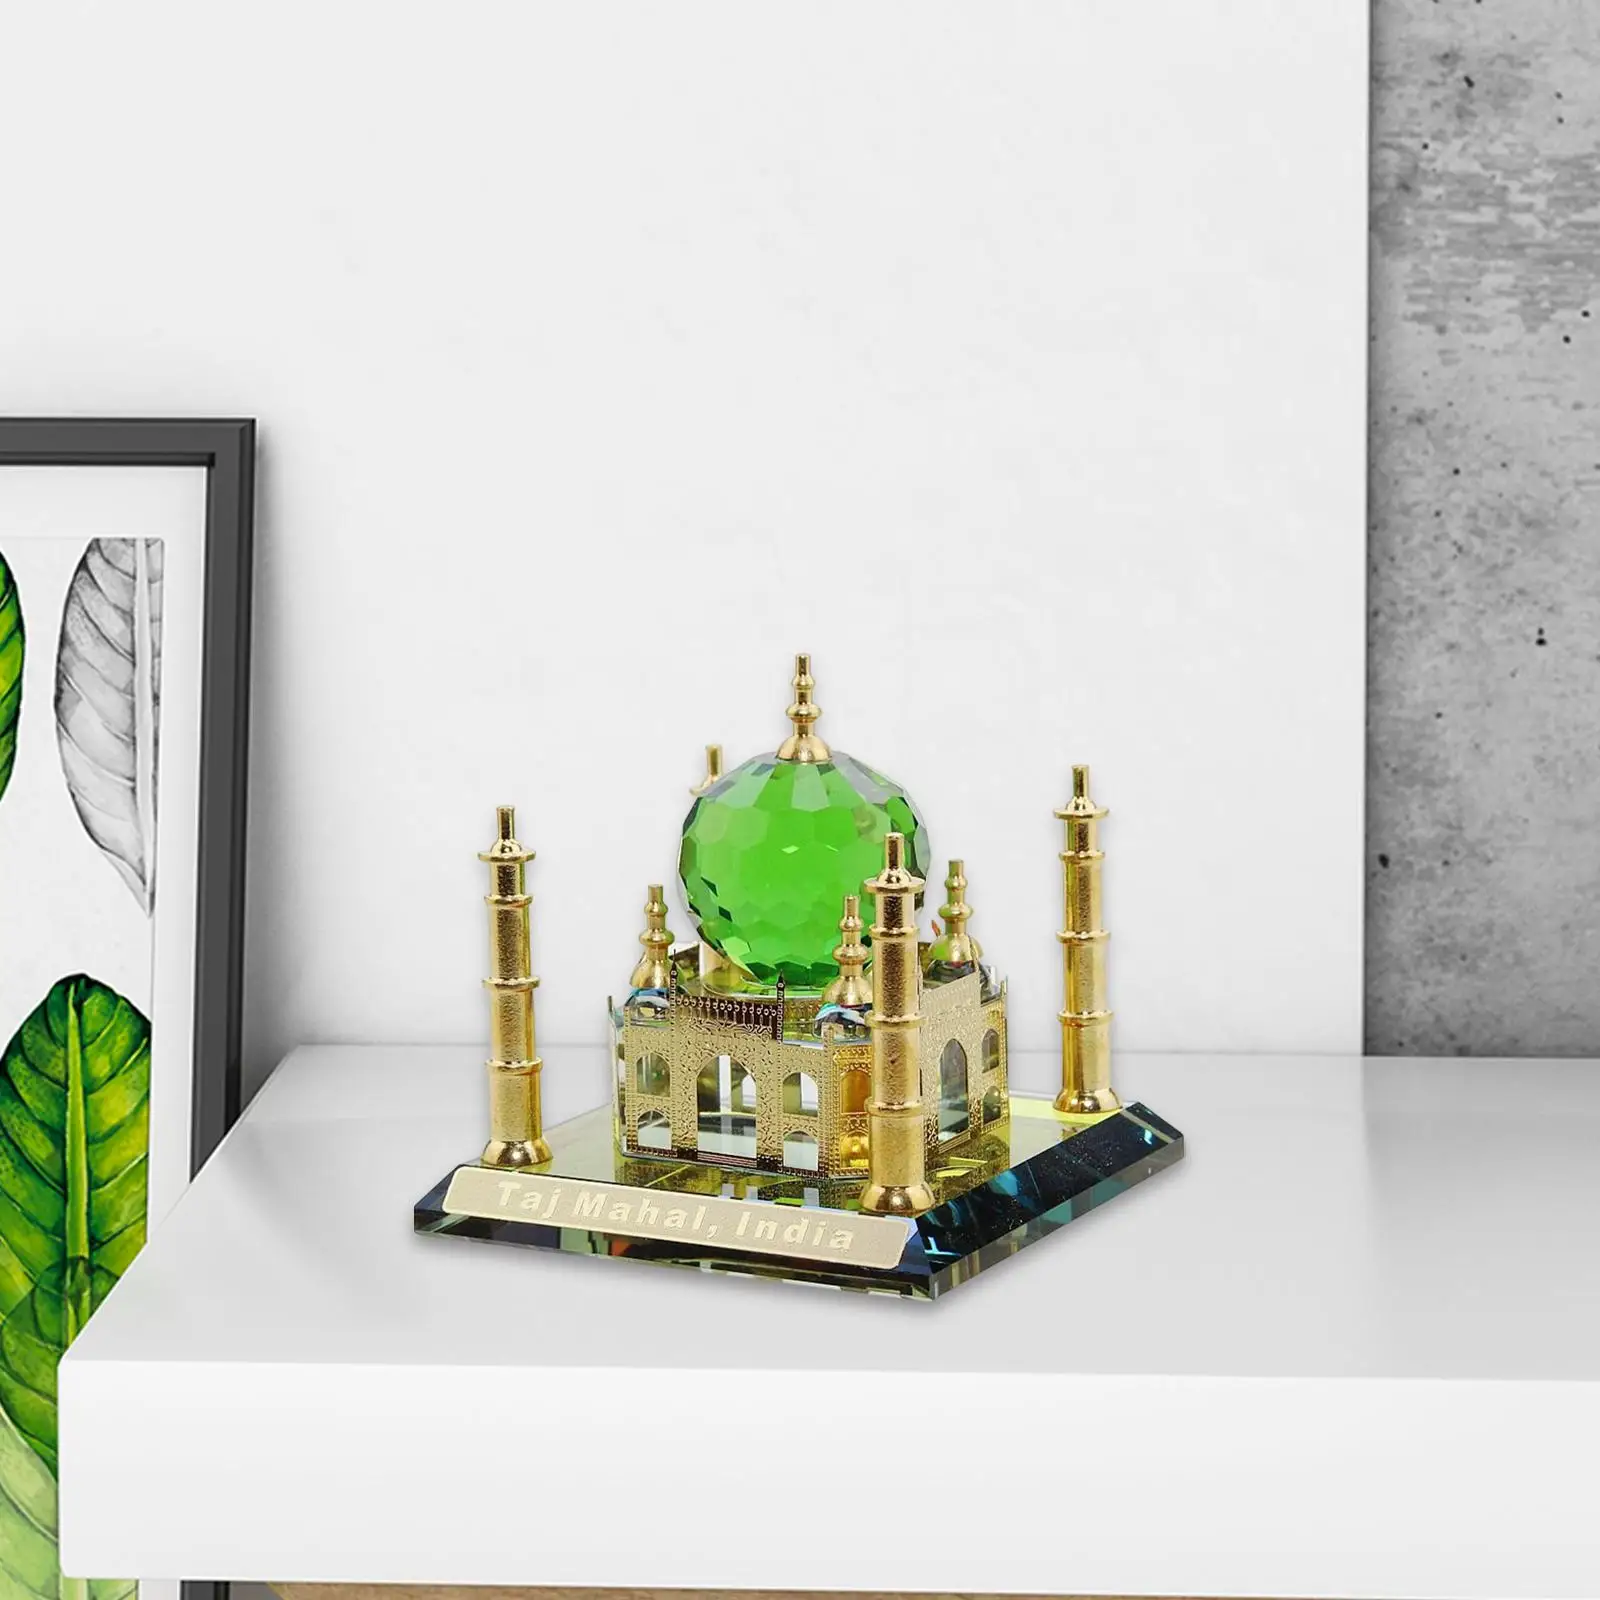 Mosque Model Table Artwork Mosque Miniature Model Islamic Showpiece Car Dashboard for Fireplace Office Decorations Home Holidays